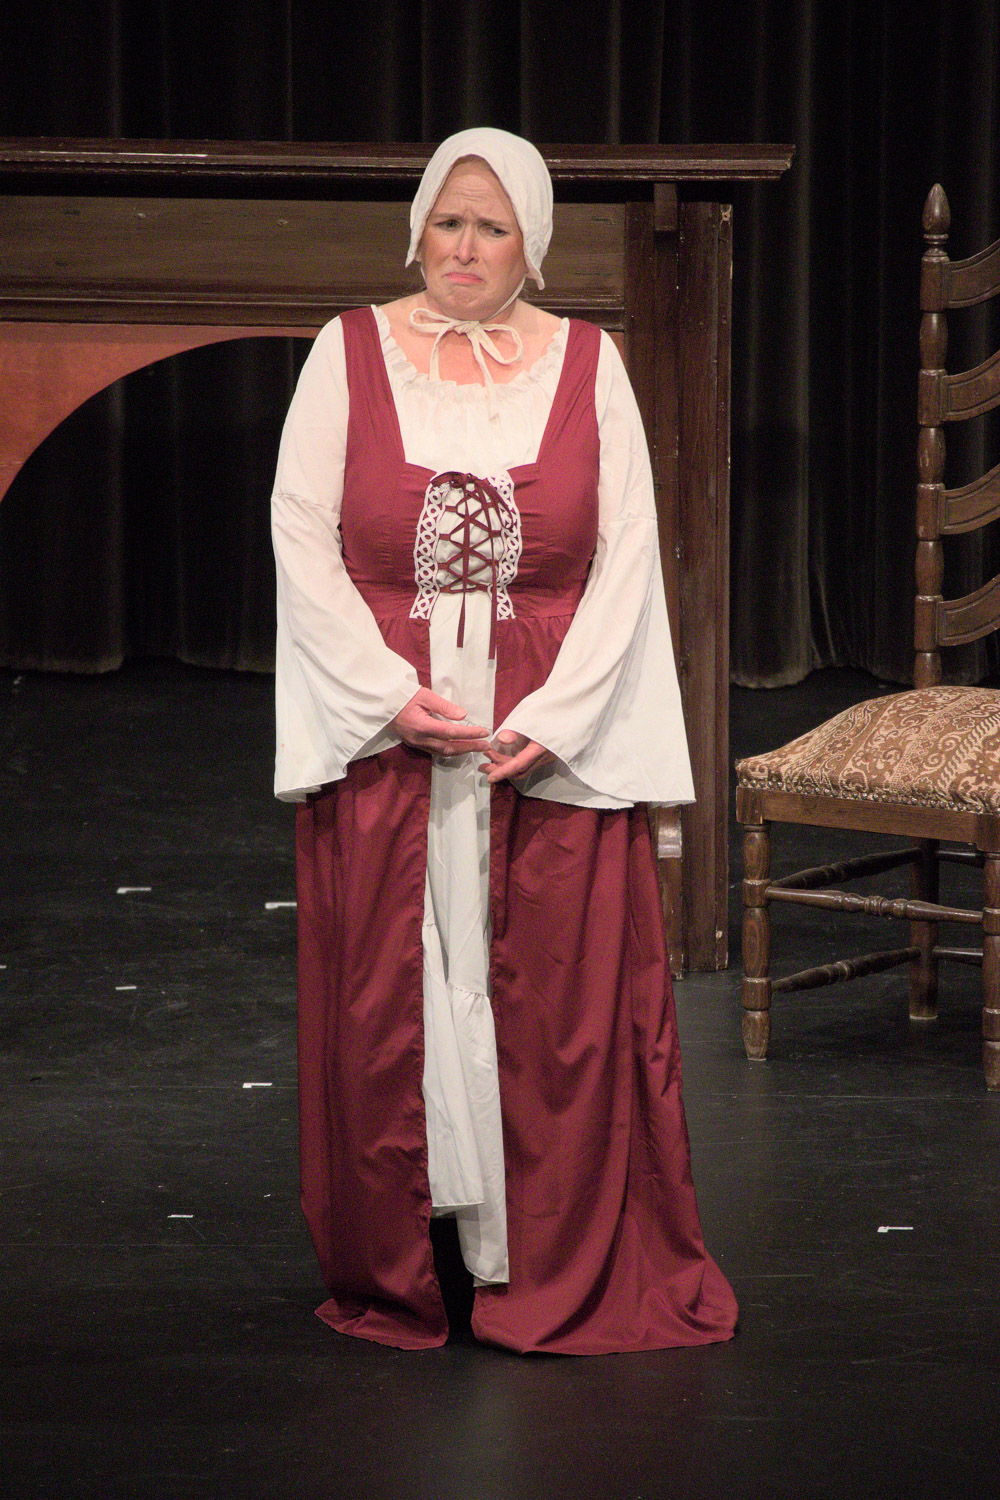 A woman on a stage dressed in a red and white medieval style gown with a white bonnet